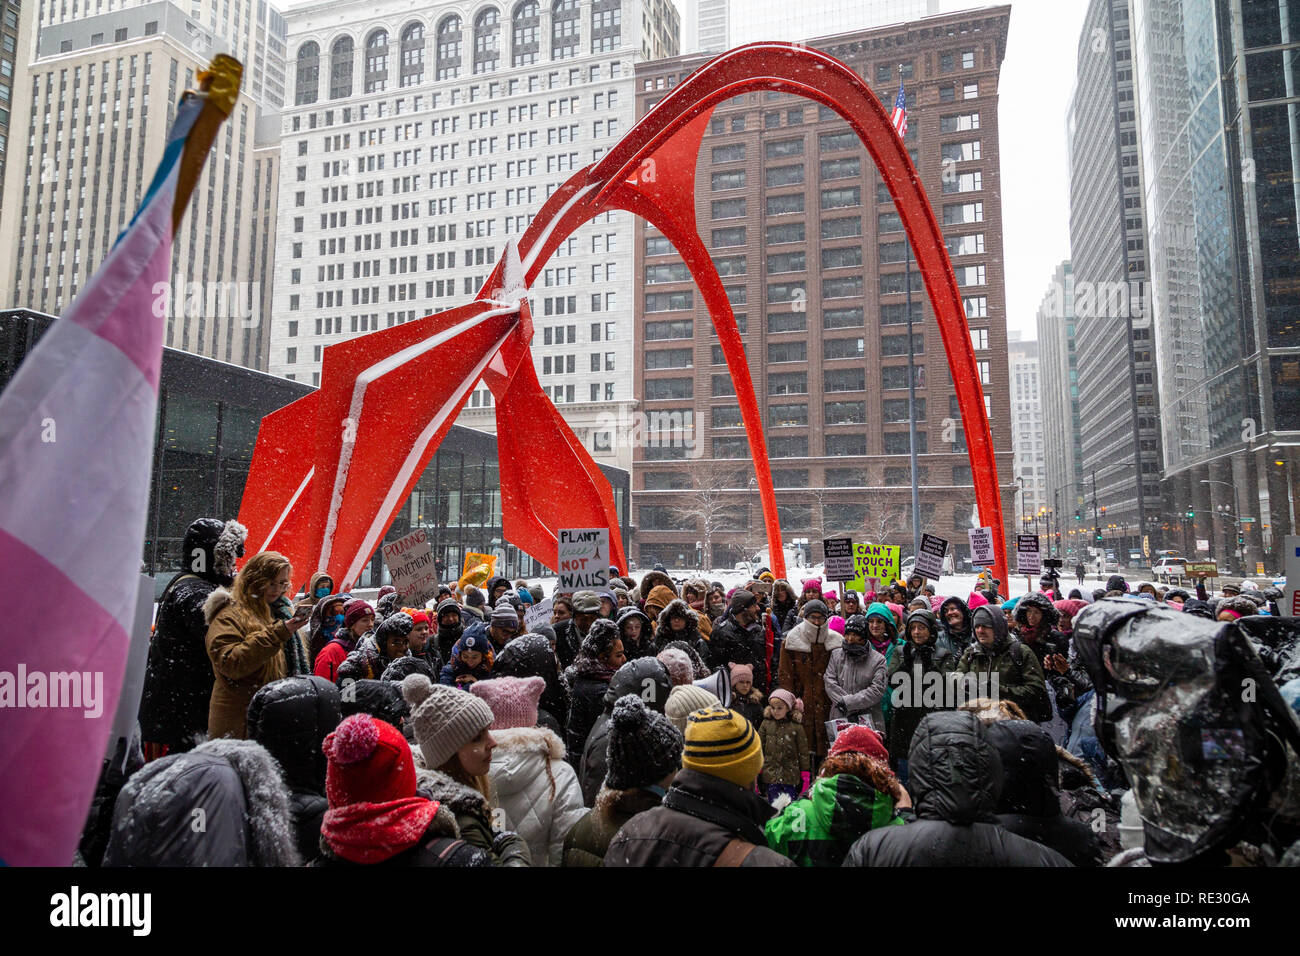 Chicago, USA. 19th Jan 2019. In the face of a fierce winter snowstorm, Chicago’s “Young Women’s March” brought a small but spirited crowd to Federal Plaza on January 19th to proclaim the power of women and display their rejection of President Donald Trump and his policies. Assembling at 10 am on a snowy Saturday, the group made impassioned speeches about issues facing young women today, and then marched around the plaza carrying mostly homemade signs and chanting resistance to the current administration. Credit: Matthew Kaplan/Alamy Live News Stock Photo